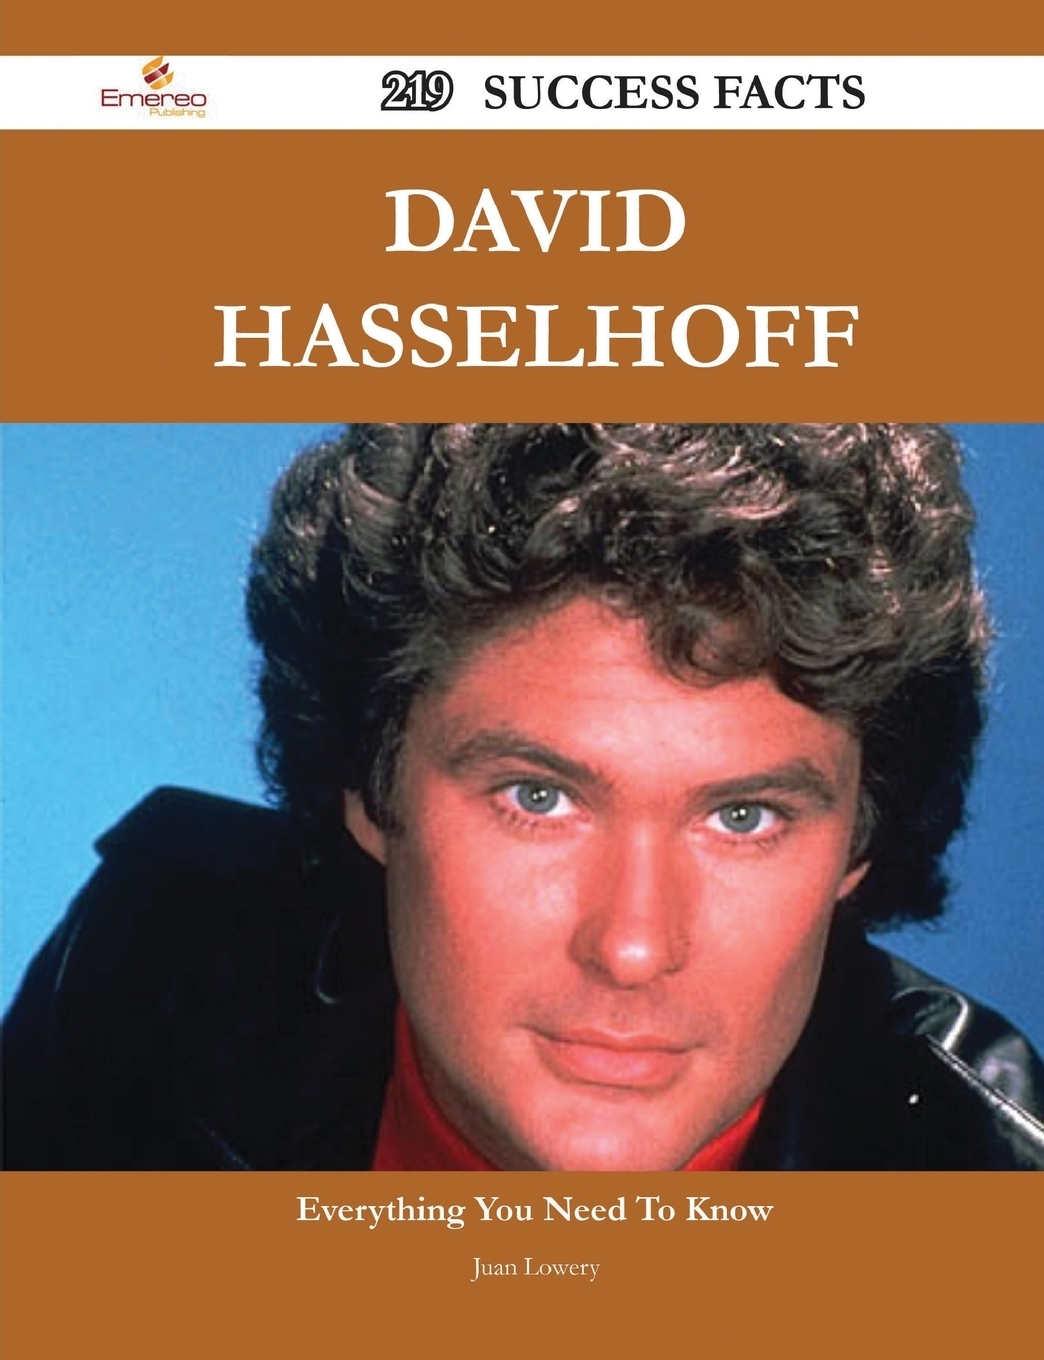 фото David Hasselhoff 219 Success Facts - Everything You Need to Know about David Hasselhoff